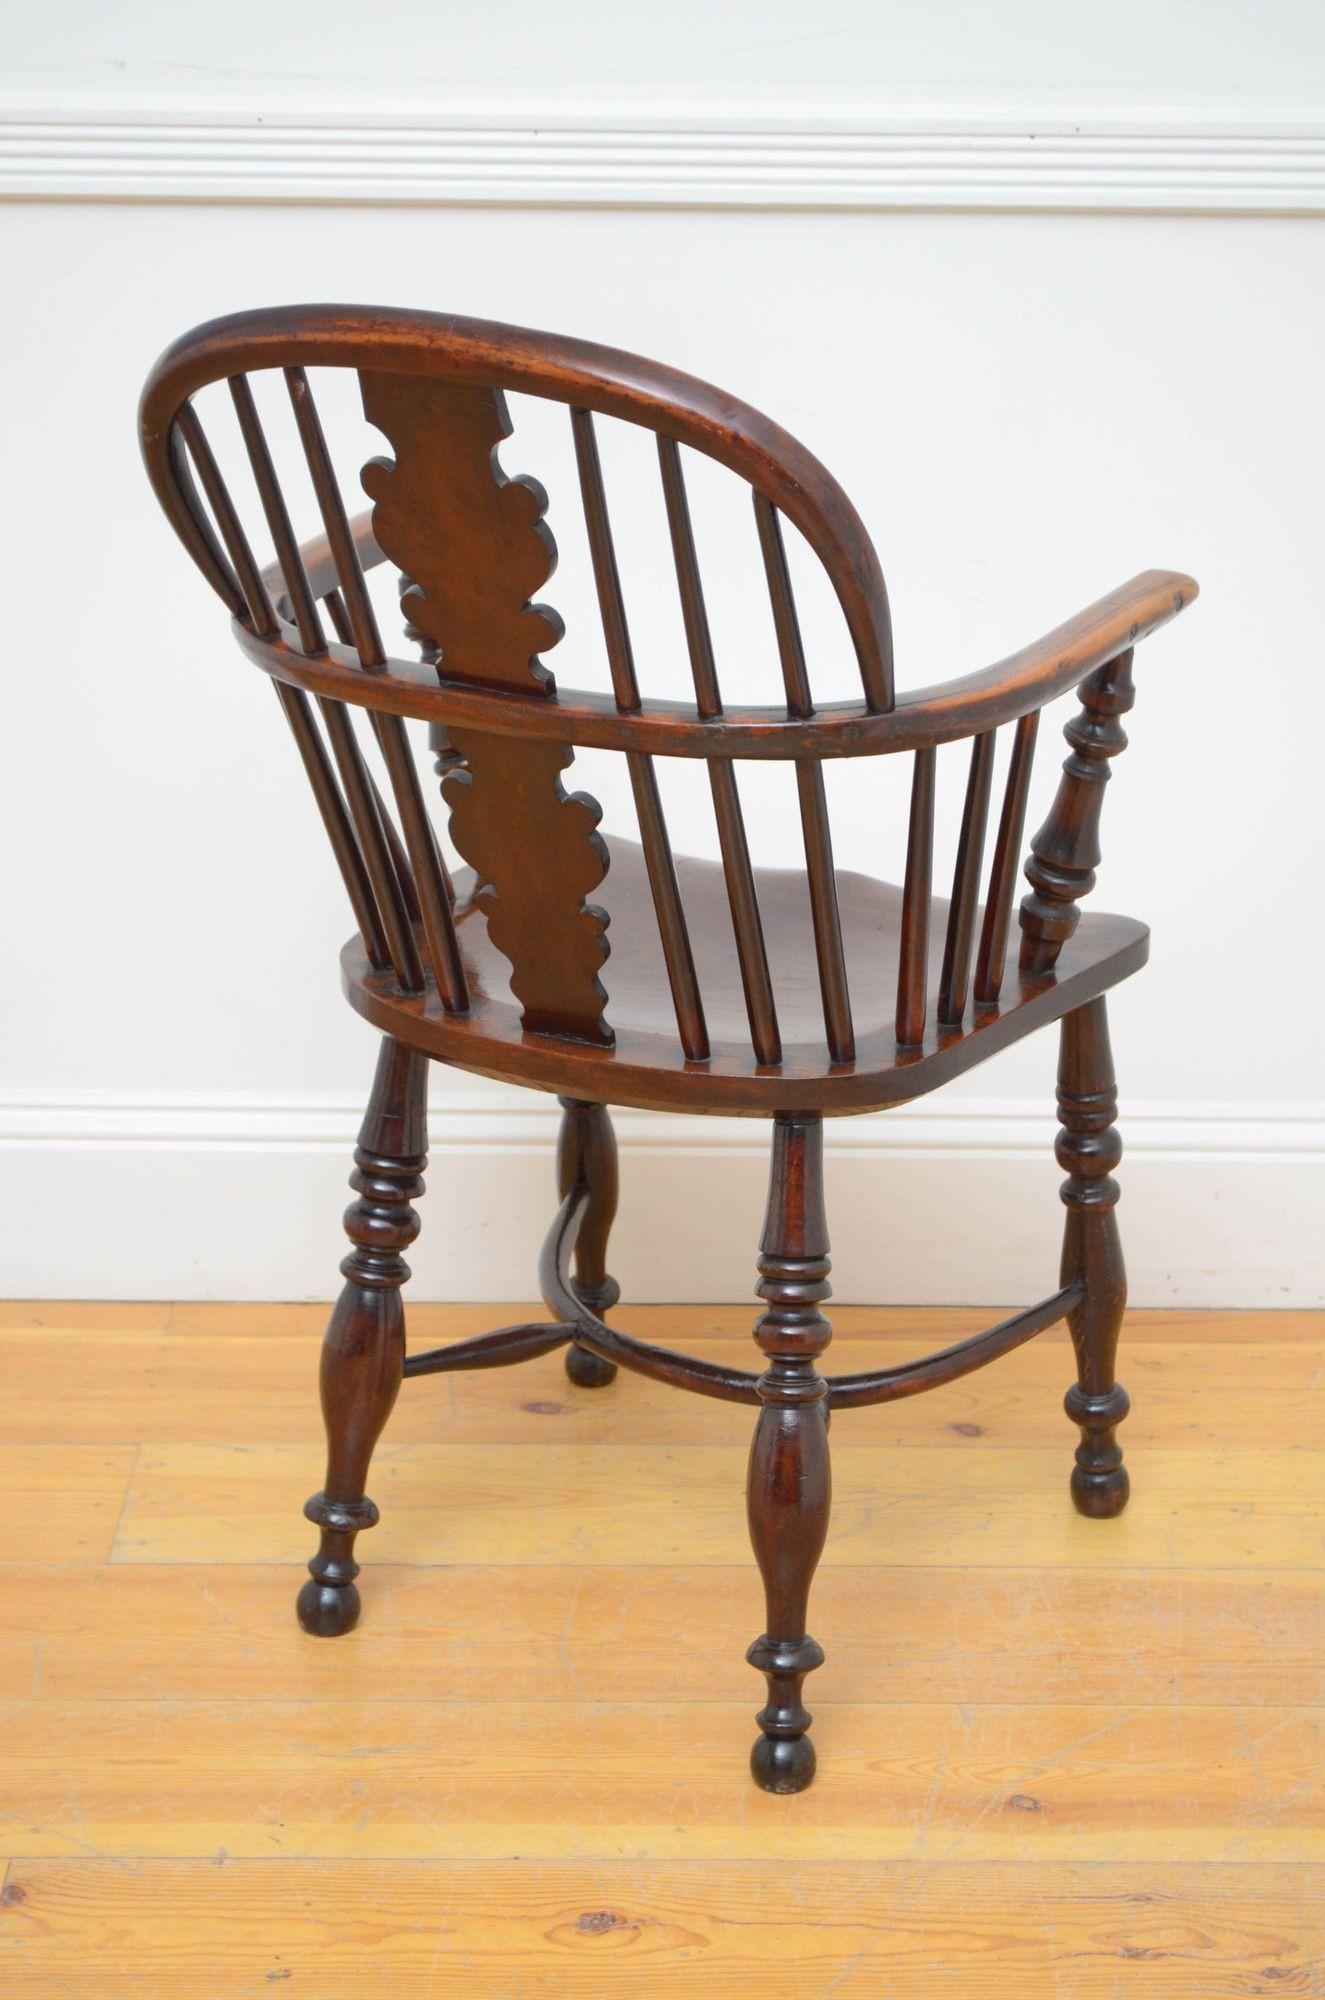 Early Victorian Low Back Windsor Chair In Good Condition For Sale In Whaley Bridge, GB